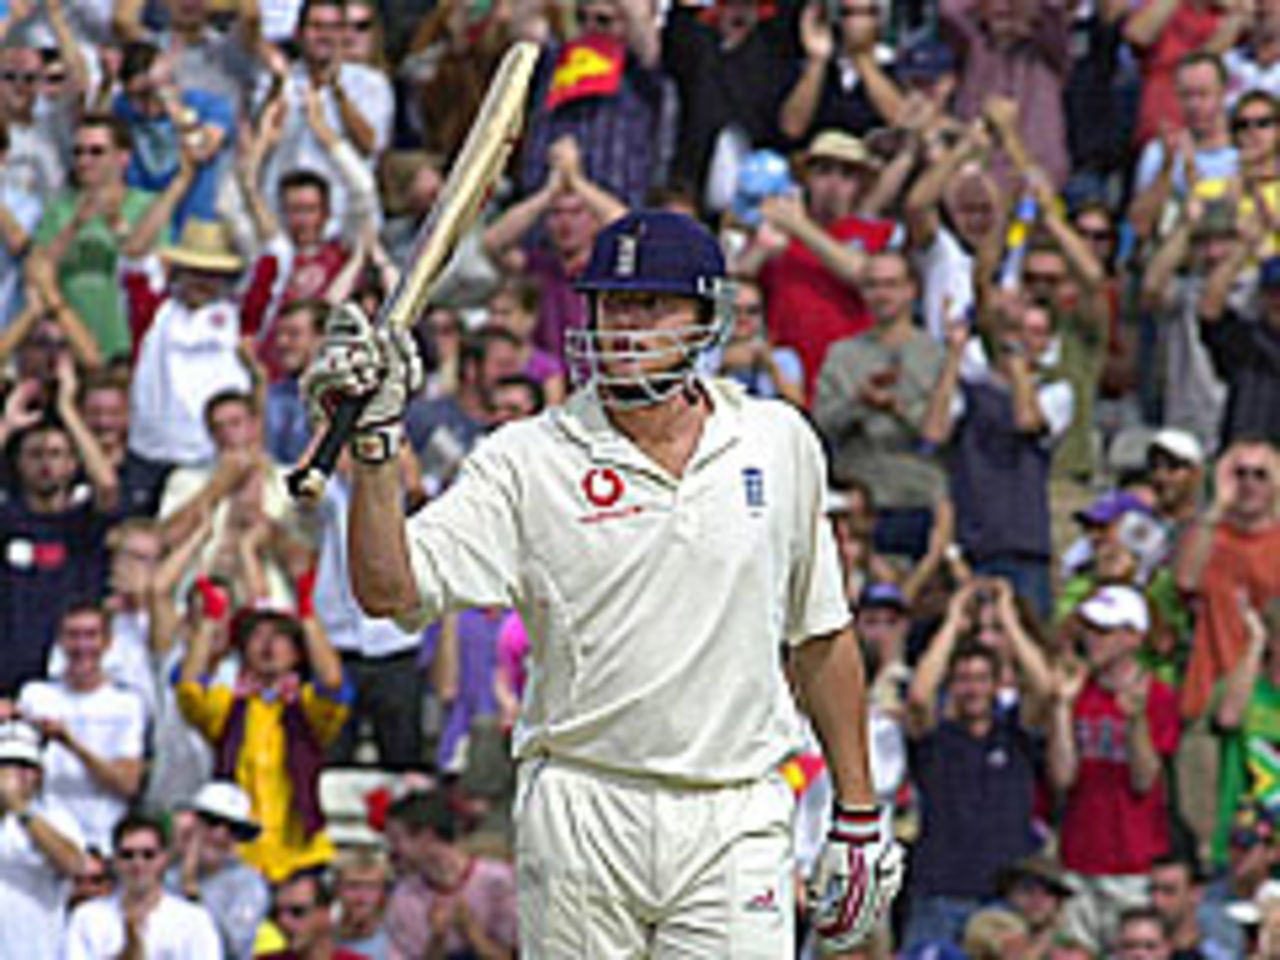 Andrew Flintoff salutes the crowd during his dazzling 95 which gave England a handy lead in the final npower Test at The Oval